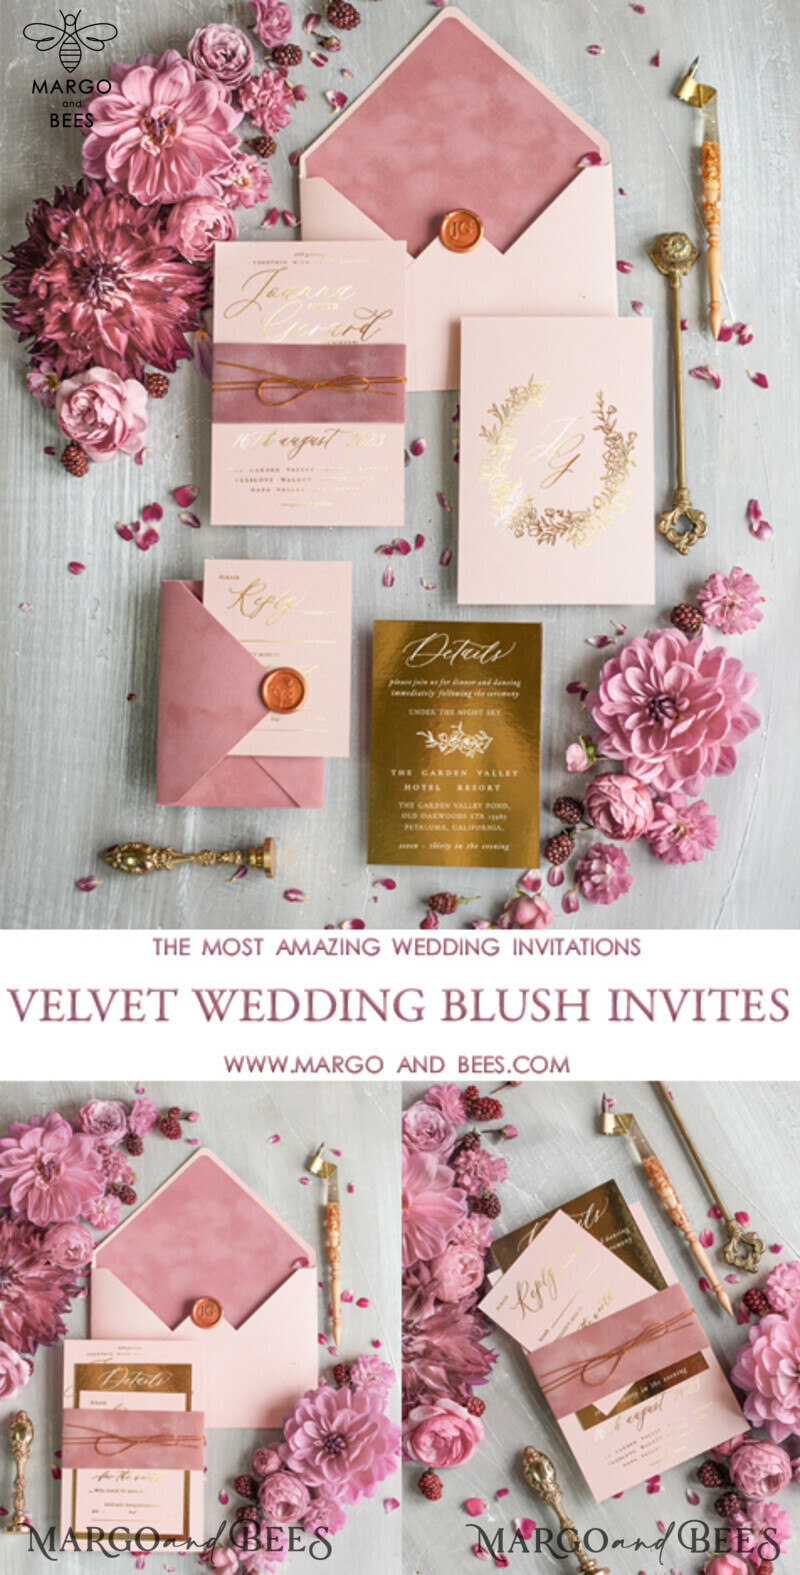 Elegant and Enchanting: Glamour Gold Foil Wedding Invitations and Luxury Velvet Wedding Cards in a Romantic Blush Pink Wedding Invitation Suite - Your Perfect Bespoke Wedding Stationery-9